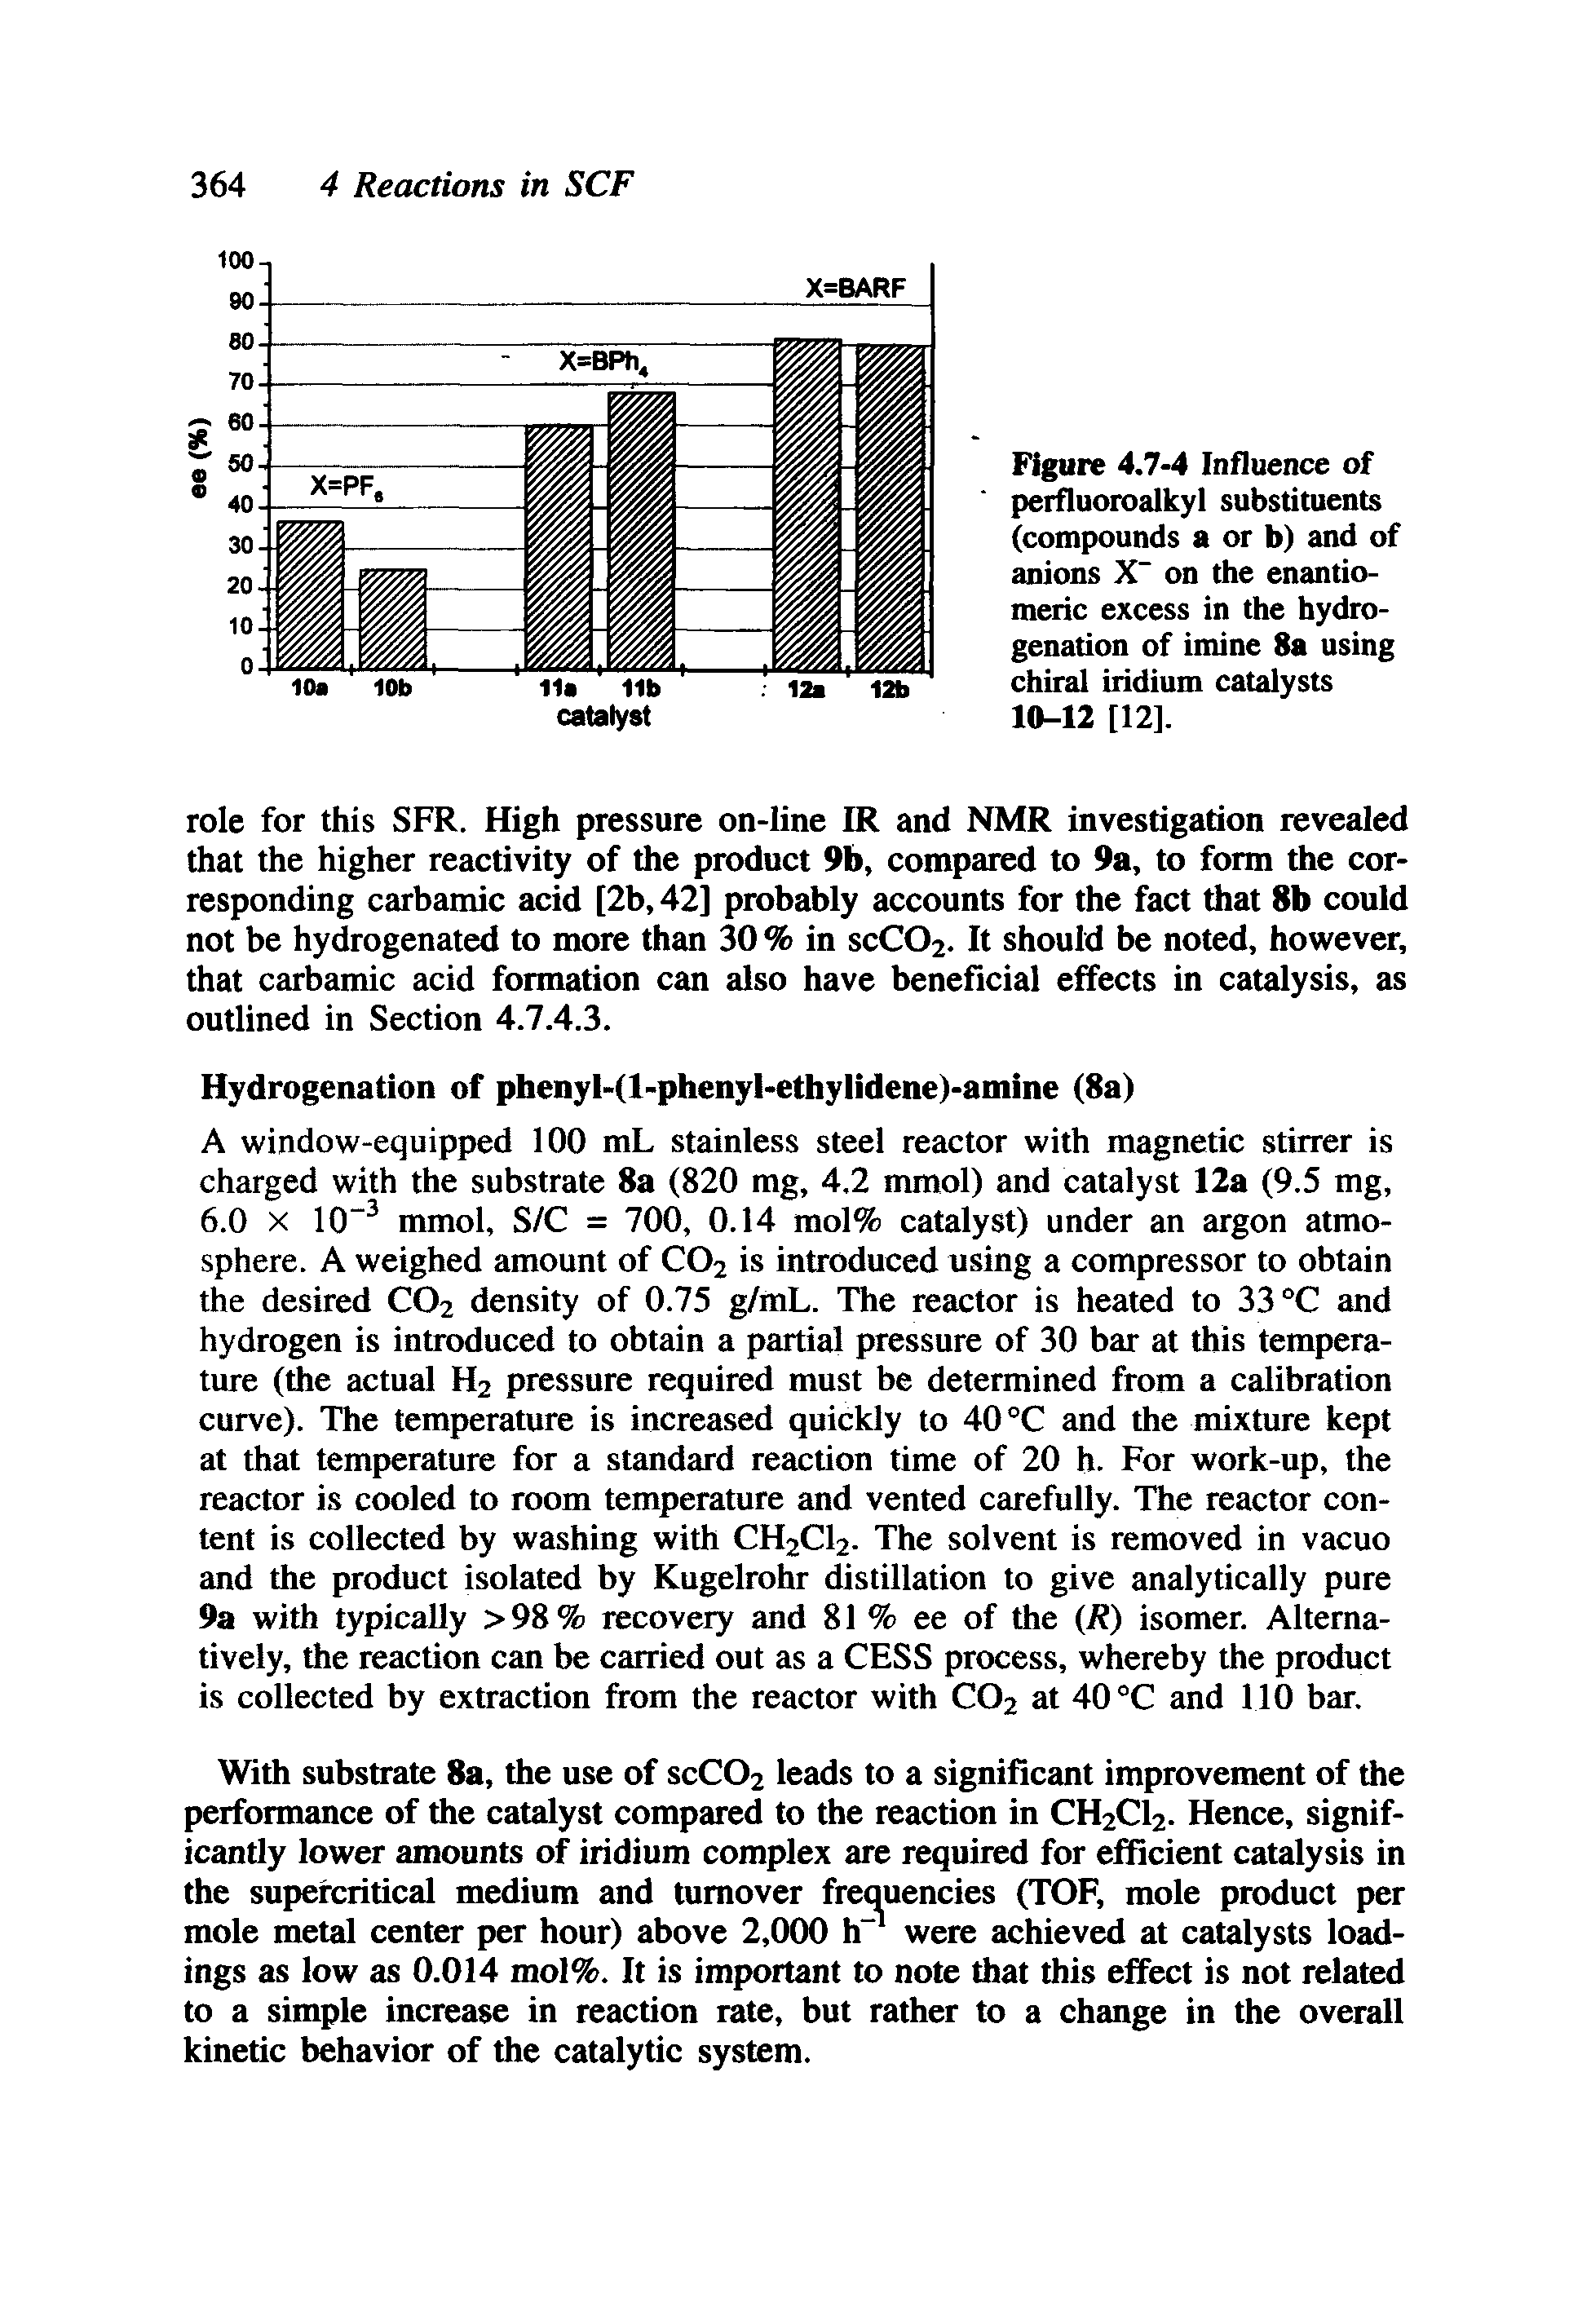 Figure 4.7-4 Influence of perfluoroalkyl substituents (compounds a or b) and of anions X on the enantiomeric excess in the hydrogenation of imine 8a using chiral iridium catalysts 10-12 [12].